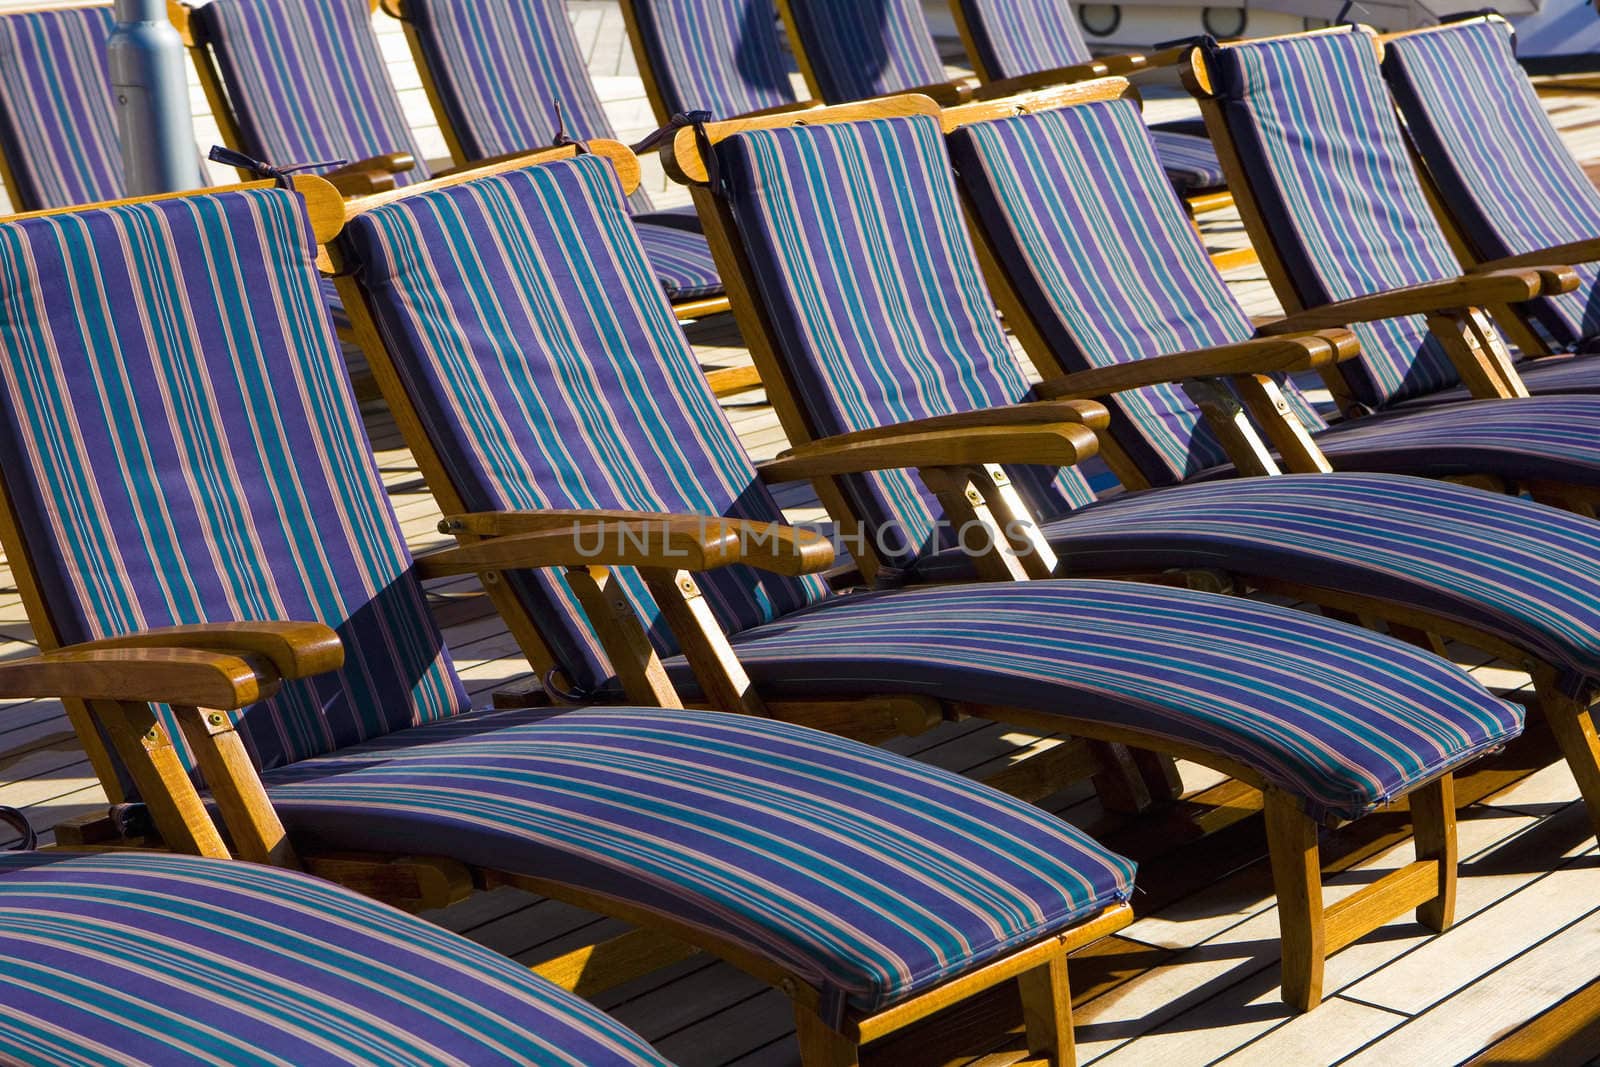 A Row of Deck Chairs on Cruise Ship